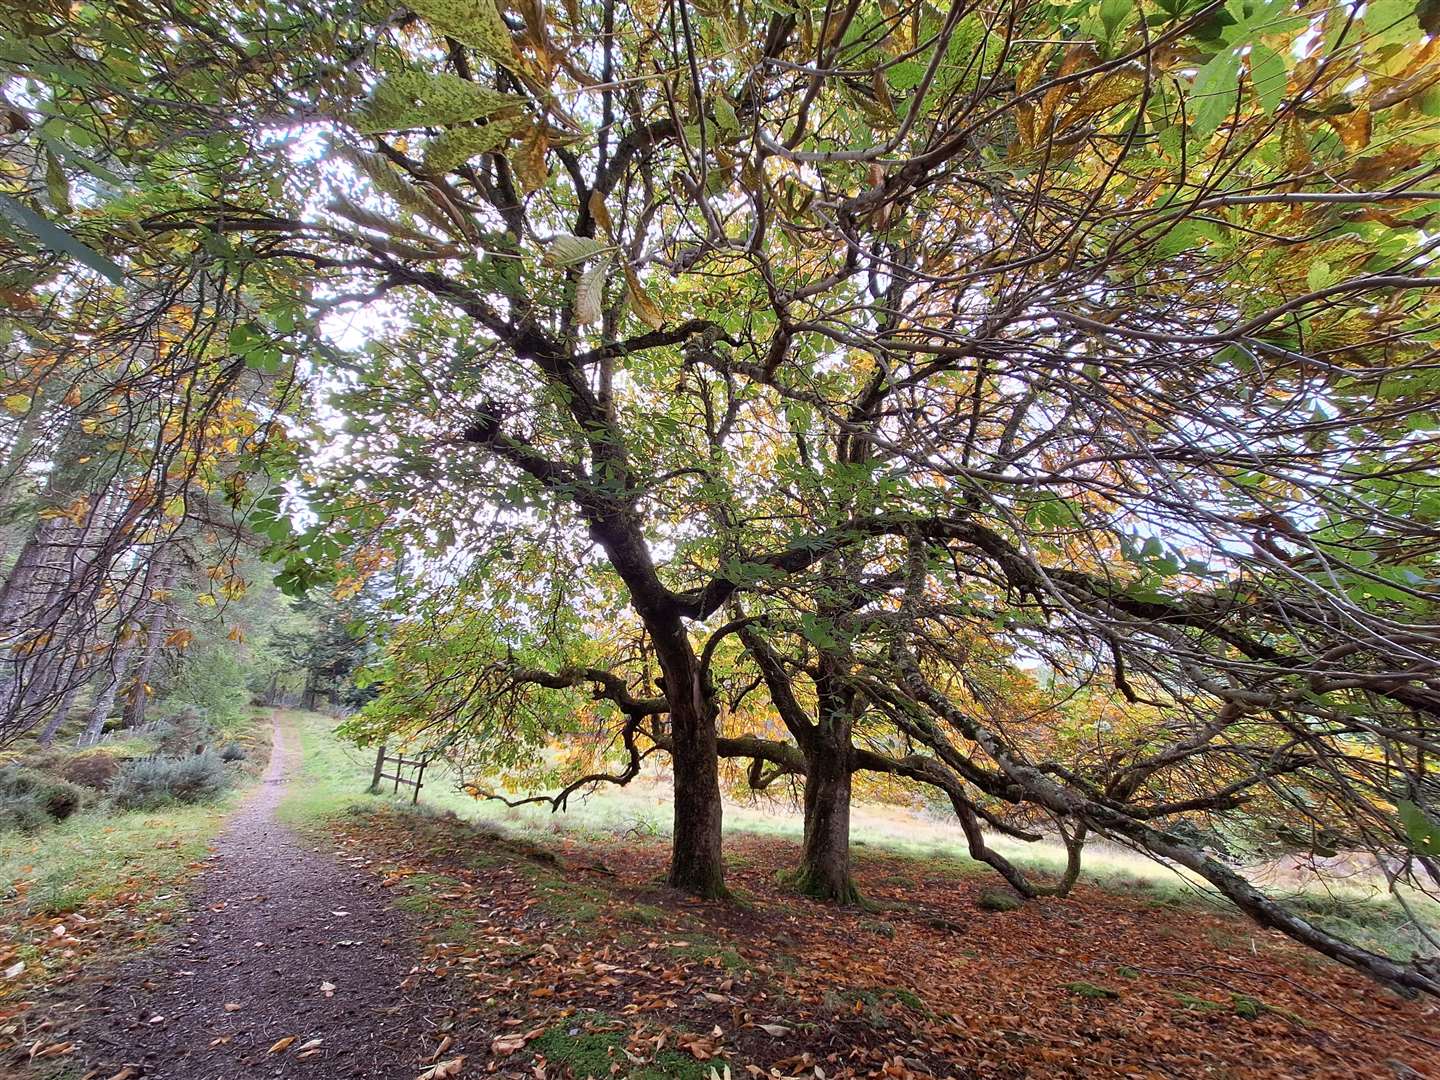 Approaching the horse chestnut trees on the old drove road.